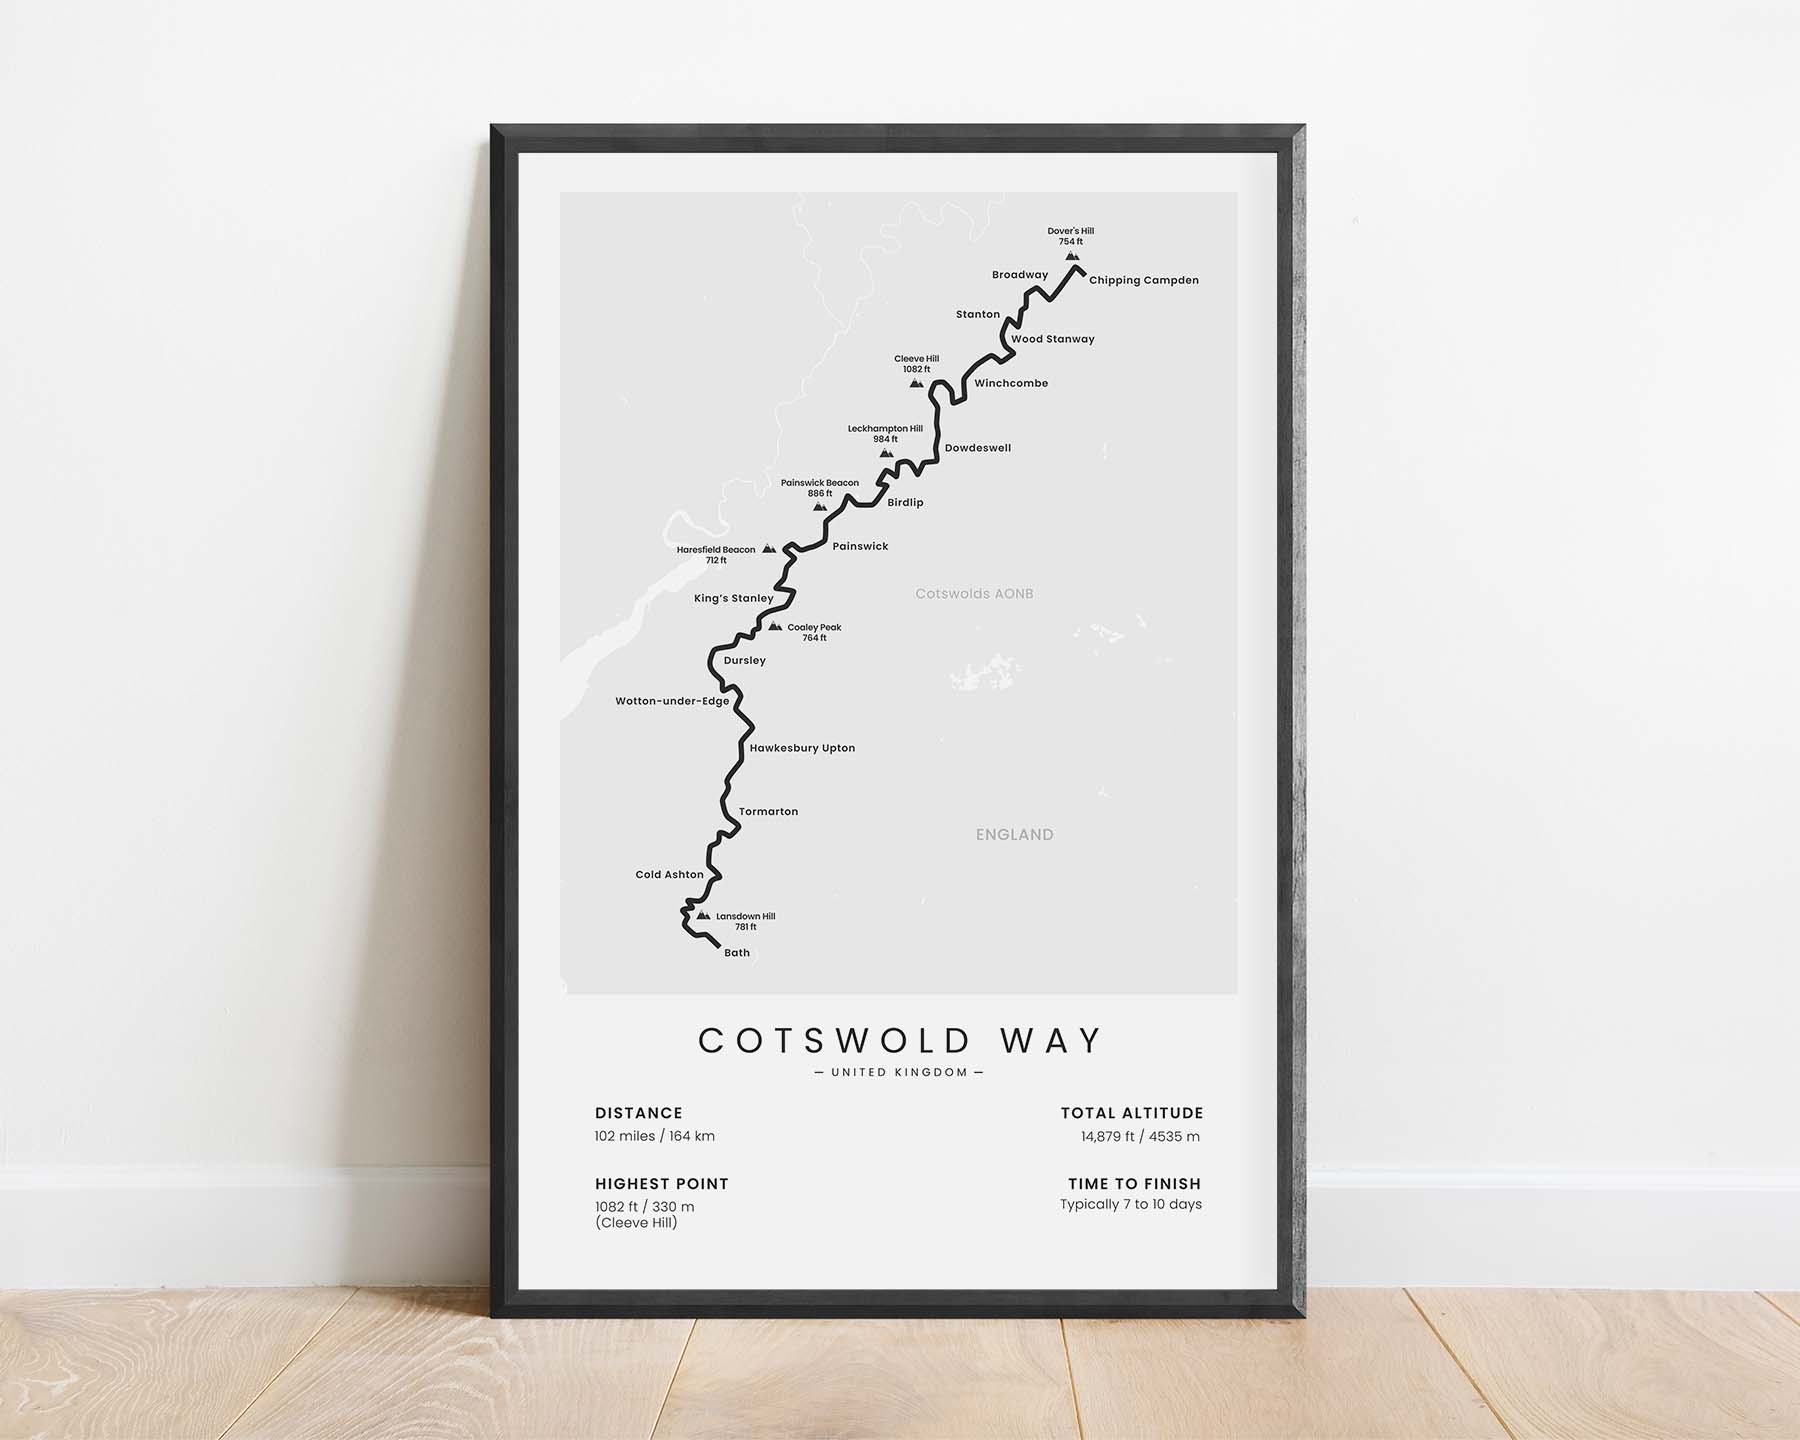 Cotswold Way National Trail (Cotswolds AONB, Chipping Campden to Bath, United Kingdom, England) Route Poster with White Background